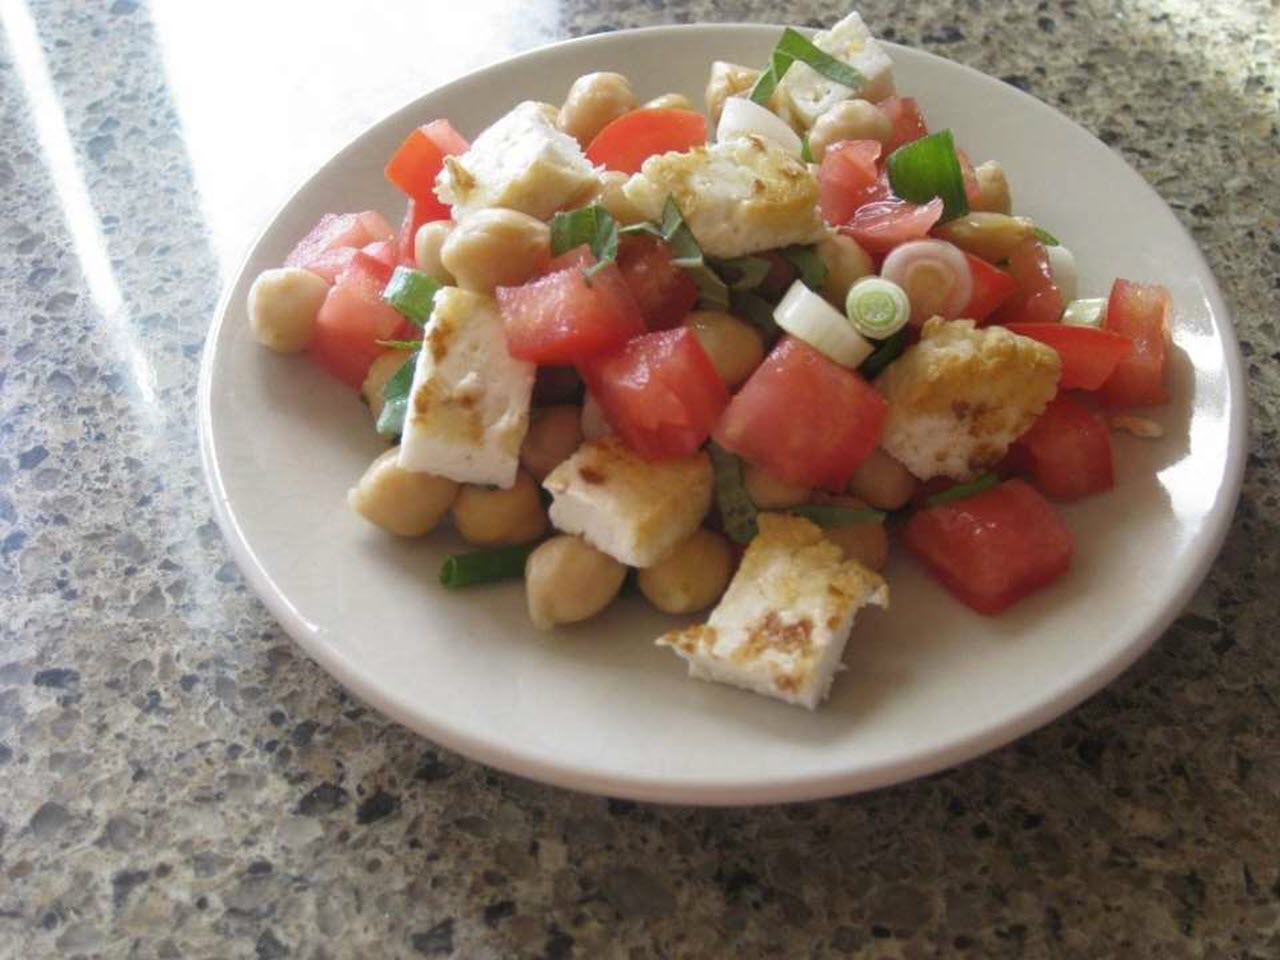 Halloumi, Chickpea, and Tomato Salad with Mint